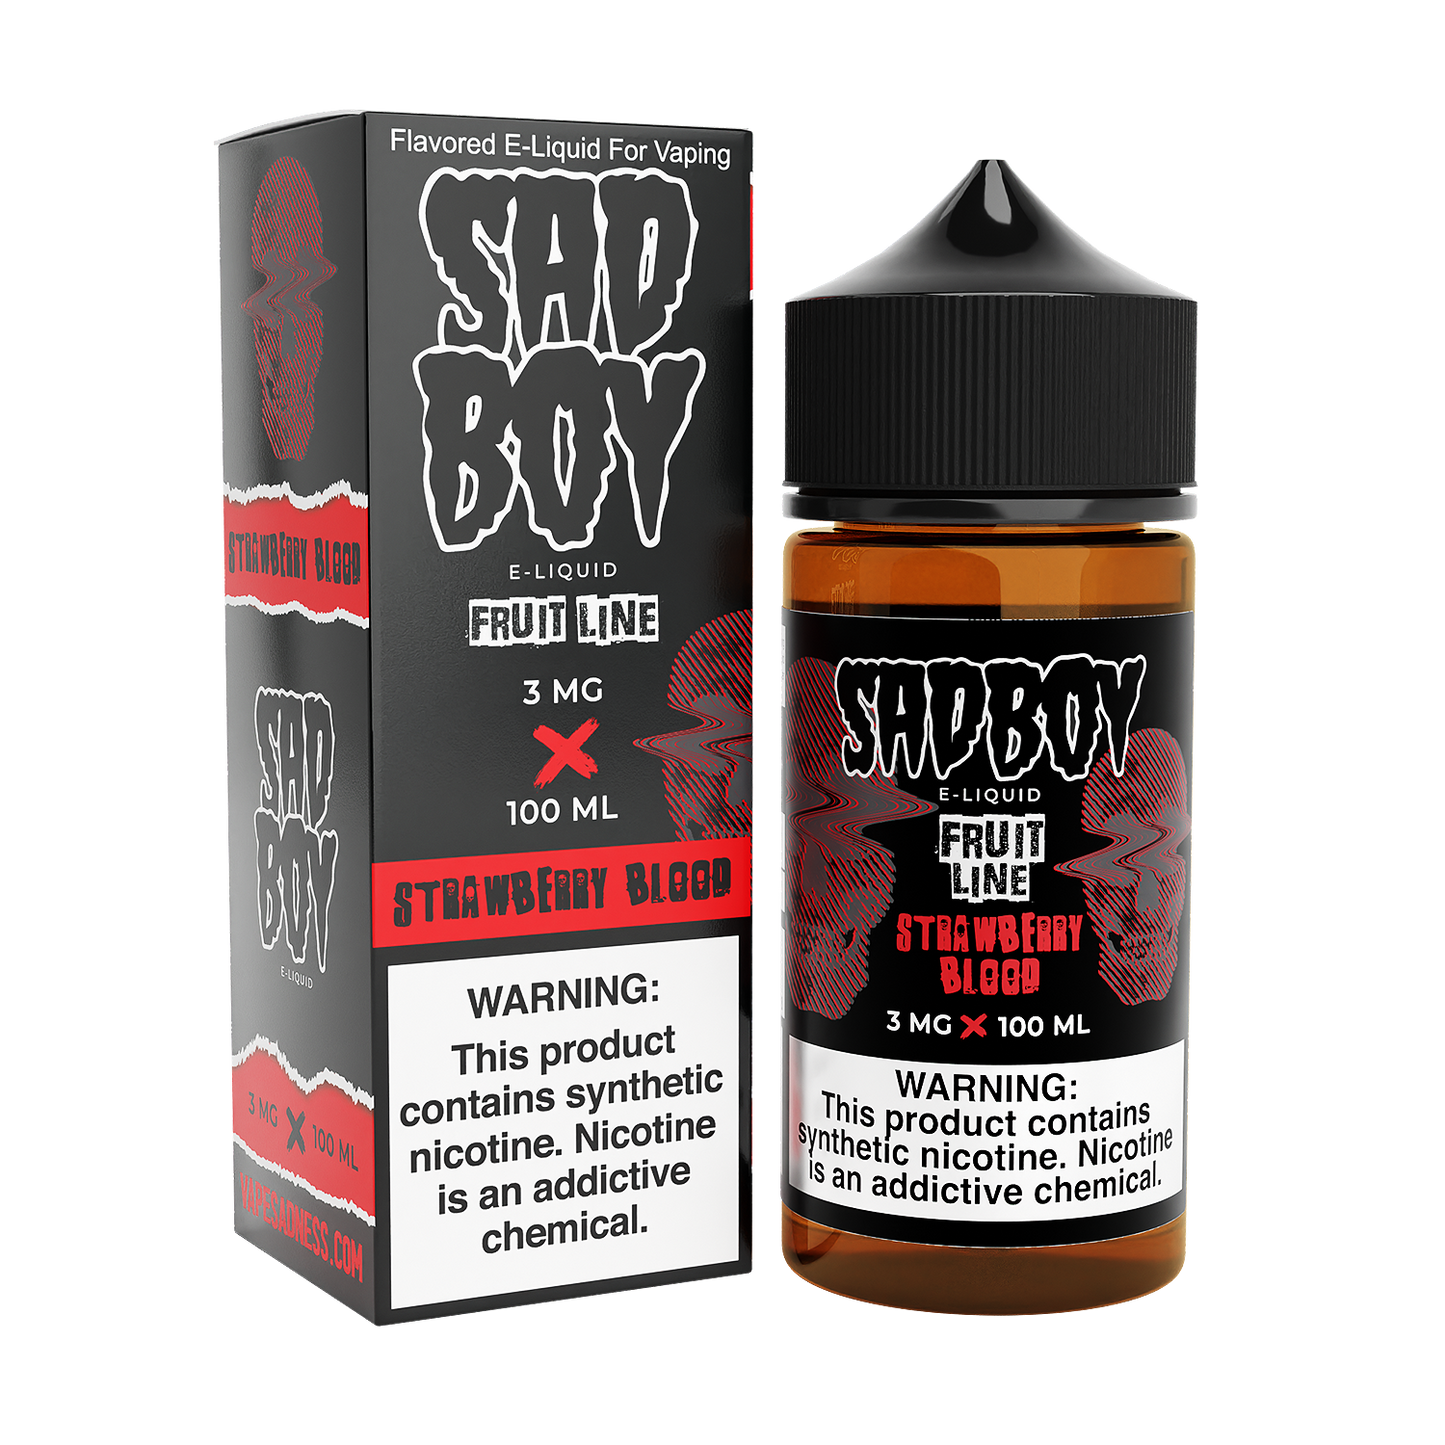 Strawberry Blood by Sadboy E-Liquid 100ml with packaging